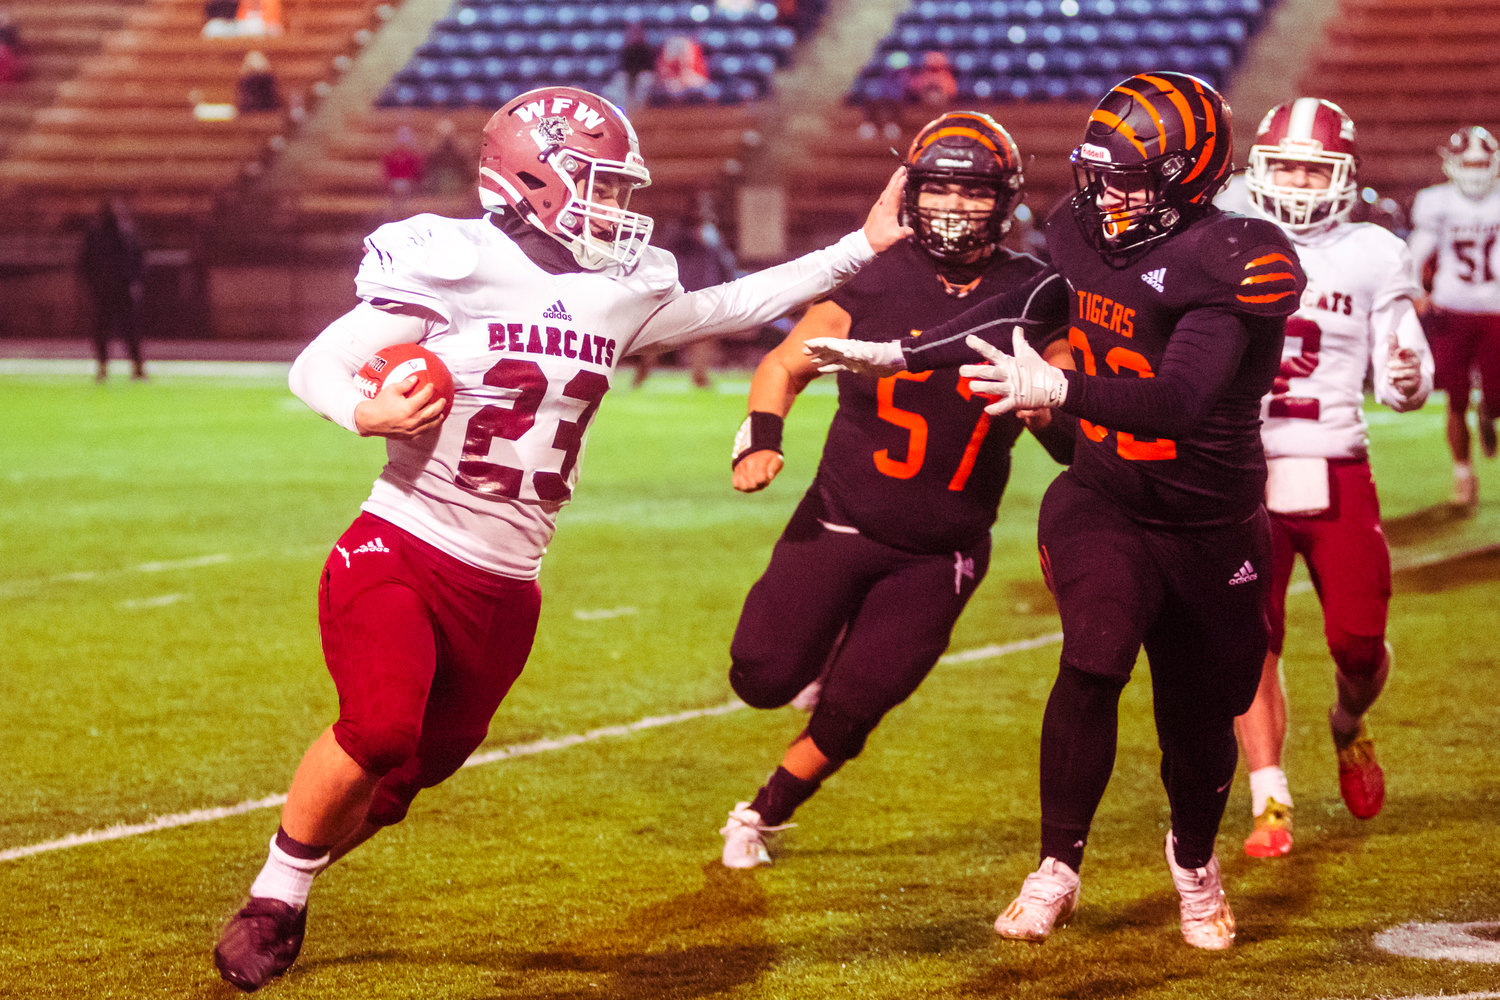 W.F. West's Luke Wichert (23) looks at a defender as he runs with the football during the Swamp Cup game against Centralia Saturday night at Tiger Stadium.